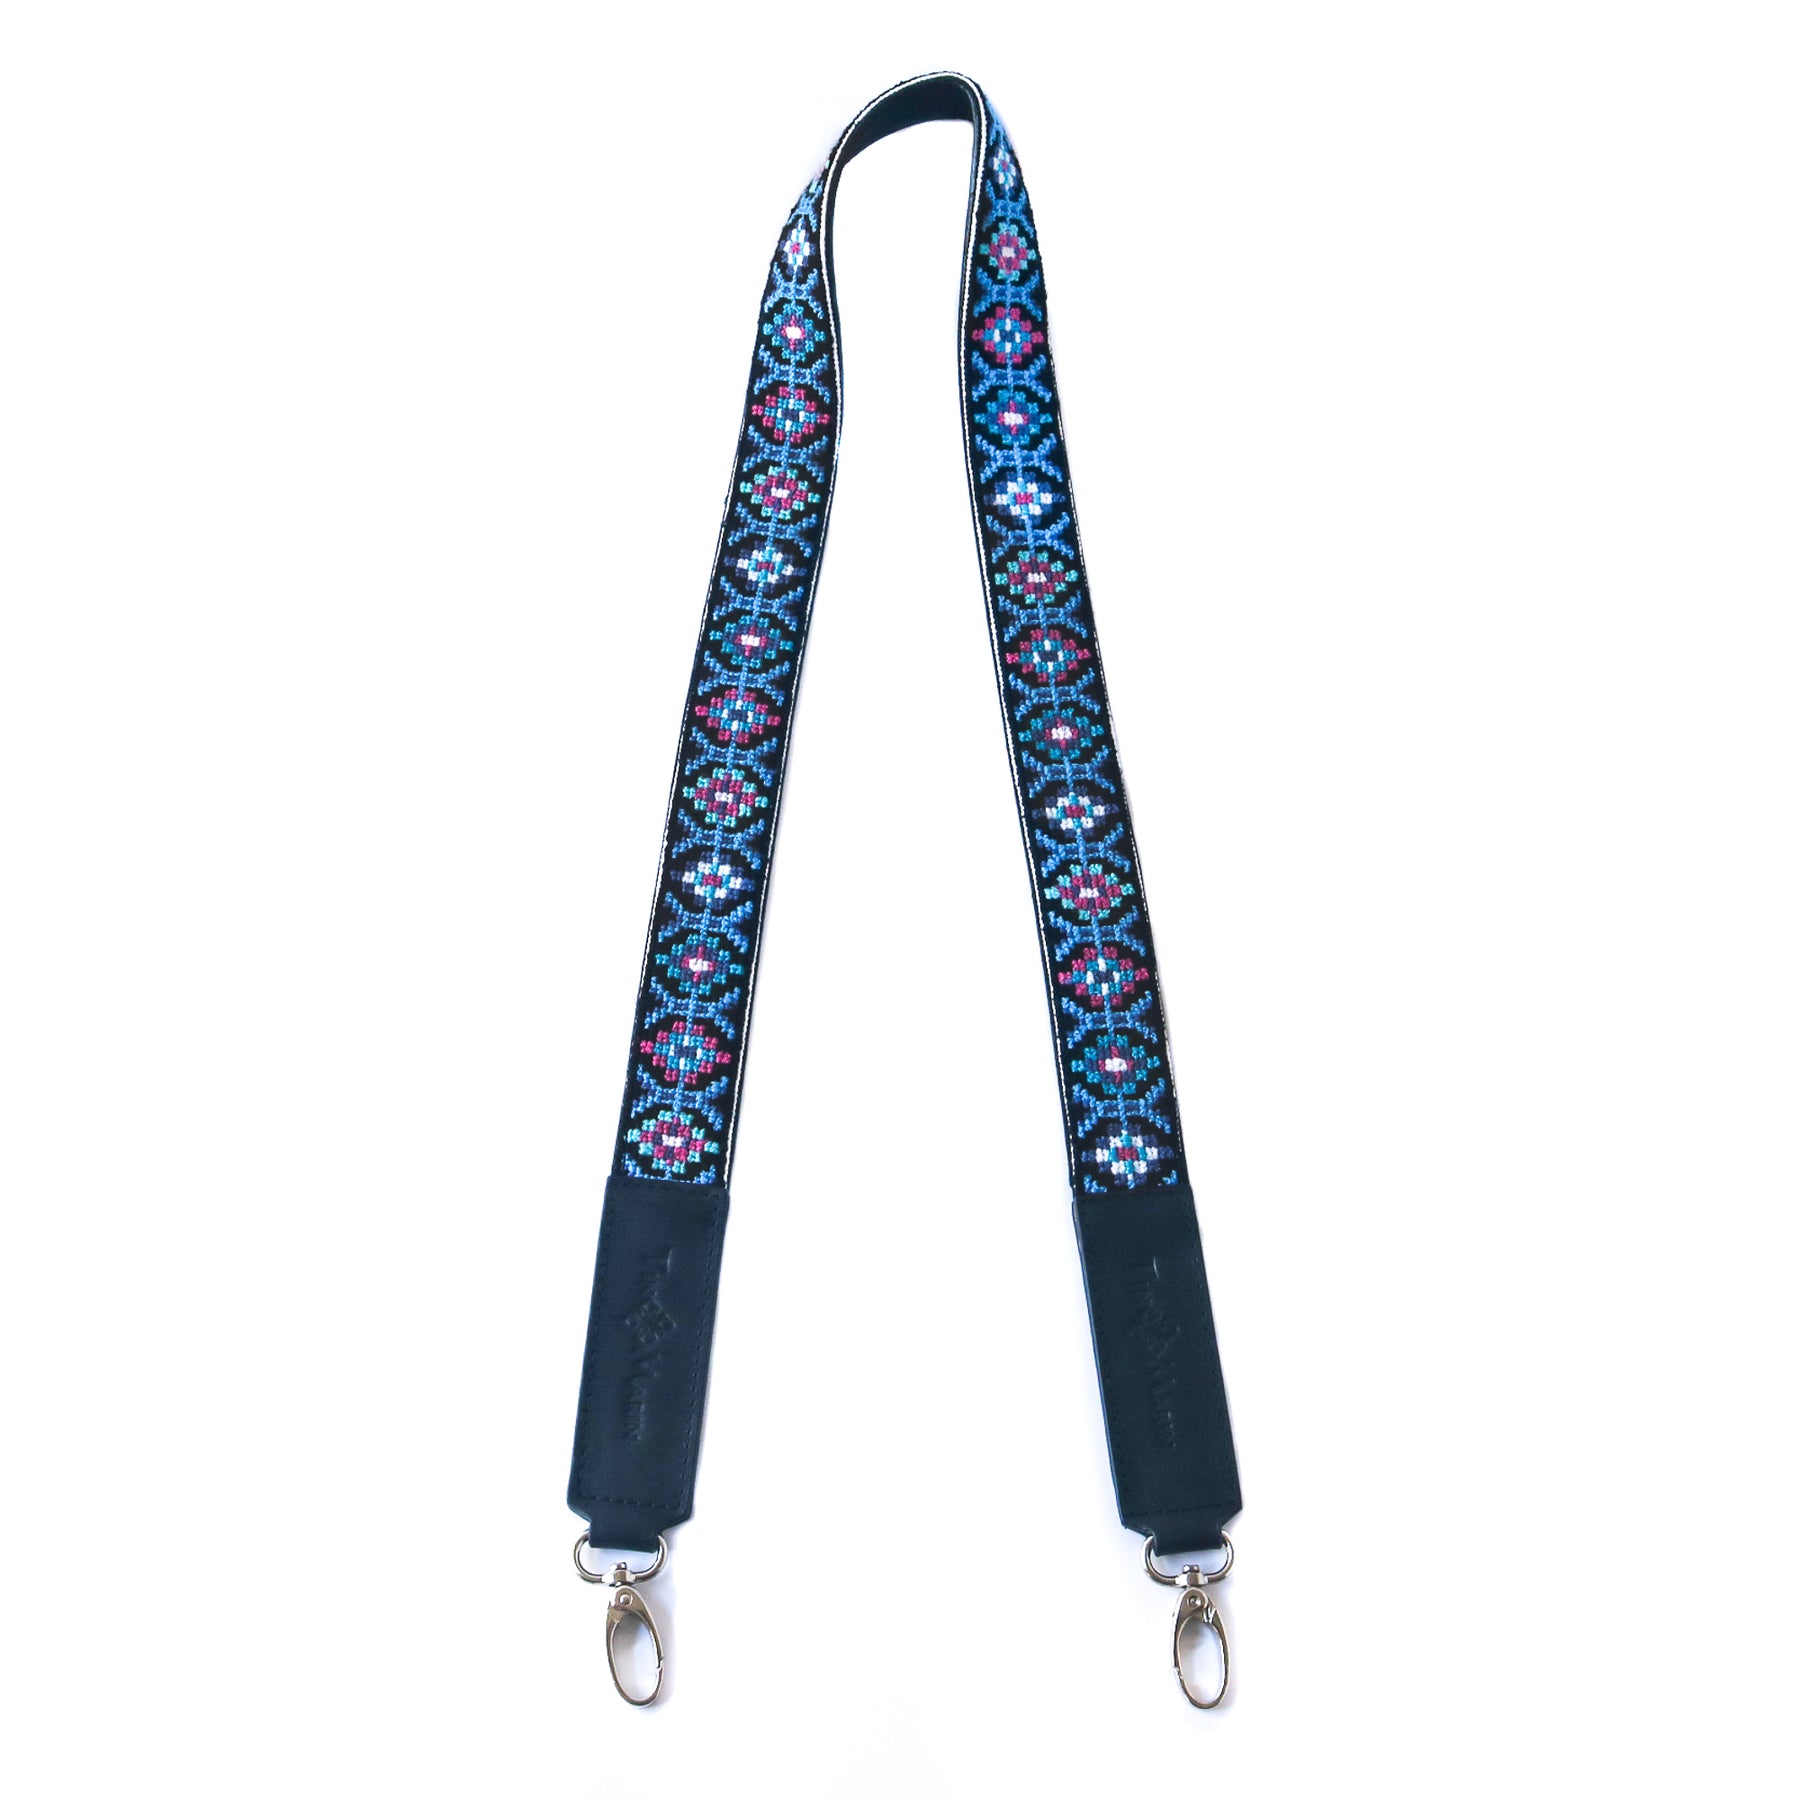 MAI Woven Bag Strap - Blue & Pink with Black Leather | Tin Marin